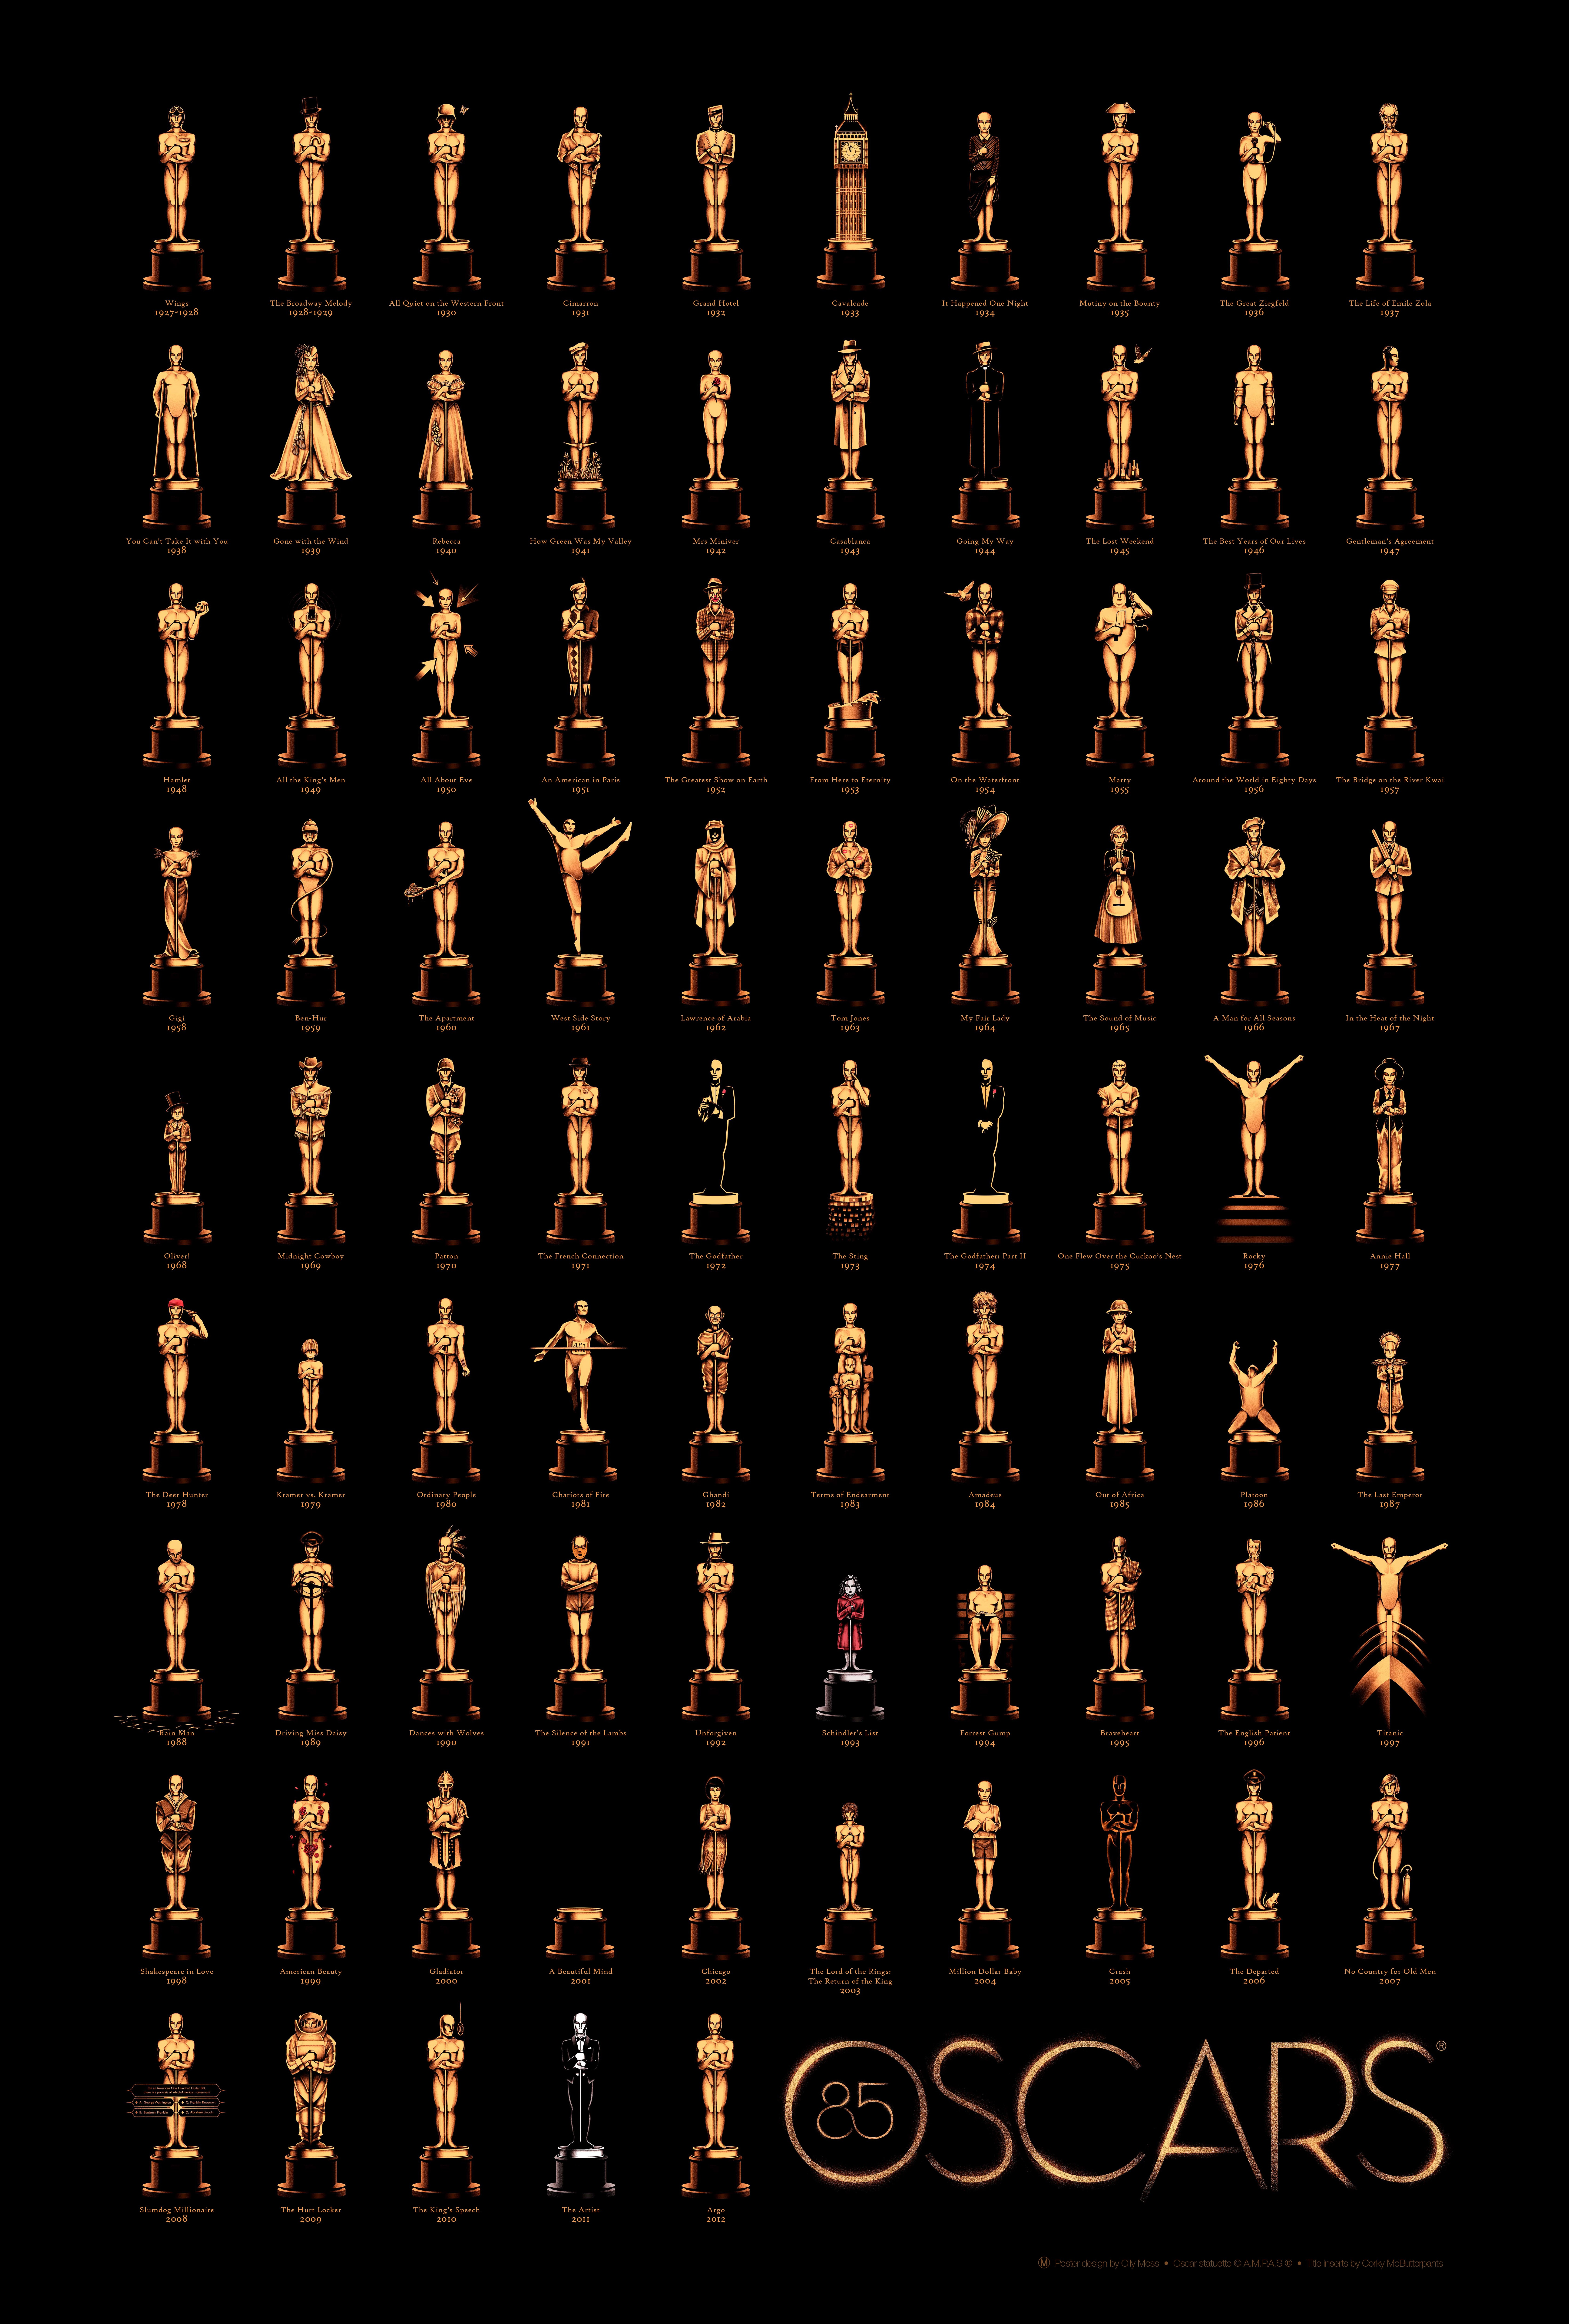 General 6750x10000 statue movies winner No Country for Old Men The Lord of the Rings Gladiator (movie) American Beauty Titanic Forrest Gump Rocky (movie) The Godfather Casablanca Oscars